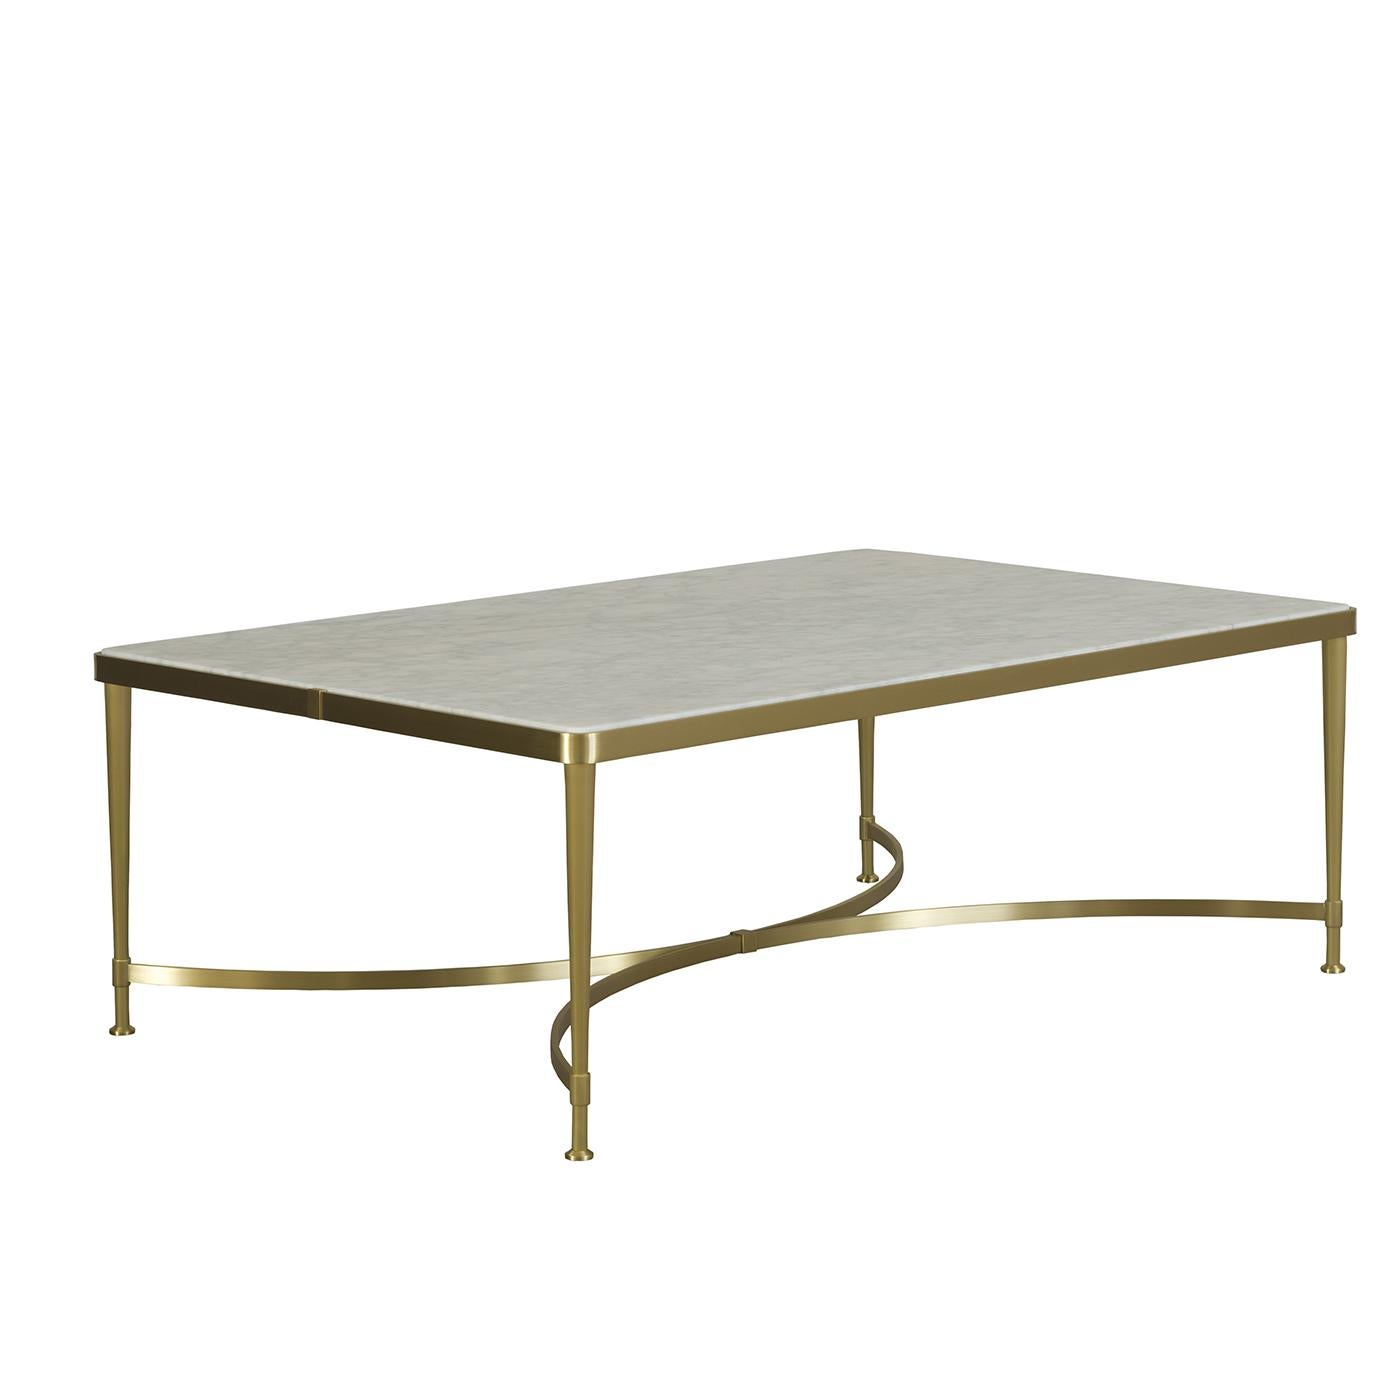 This sophisticated coffee table boasts a timeless color combination, elegant design, and high quality materials for a look that will enrich both a contemporary and a traditional setting. The rectangular marble top, with a polyester varnish is